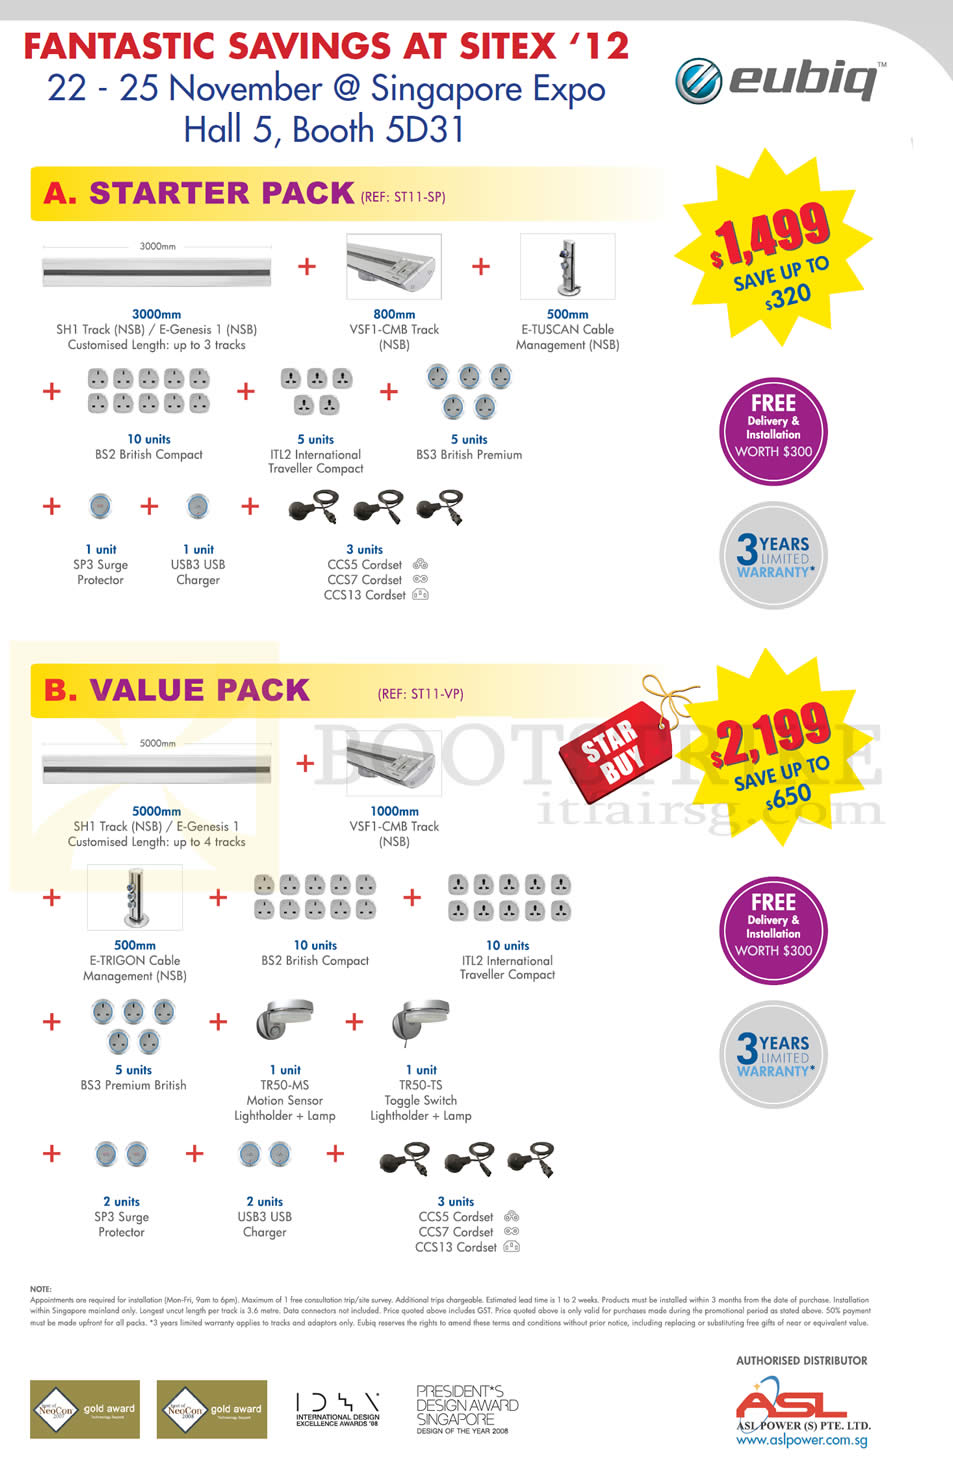 SITEX 2012 price list image brochure of Eubiq GSS Flexible Power Outlet System Starter Pack, Value Pack